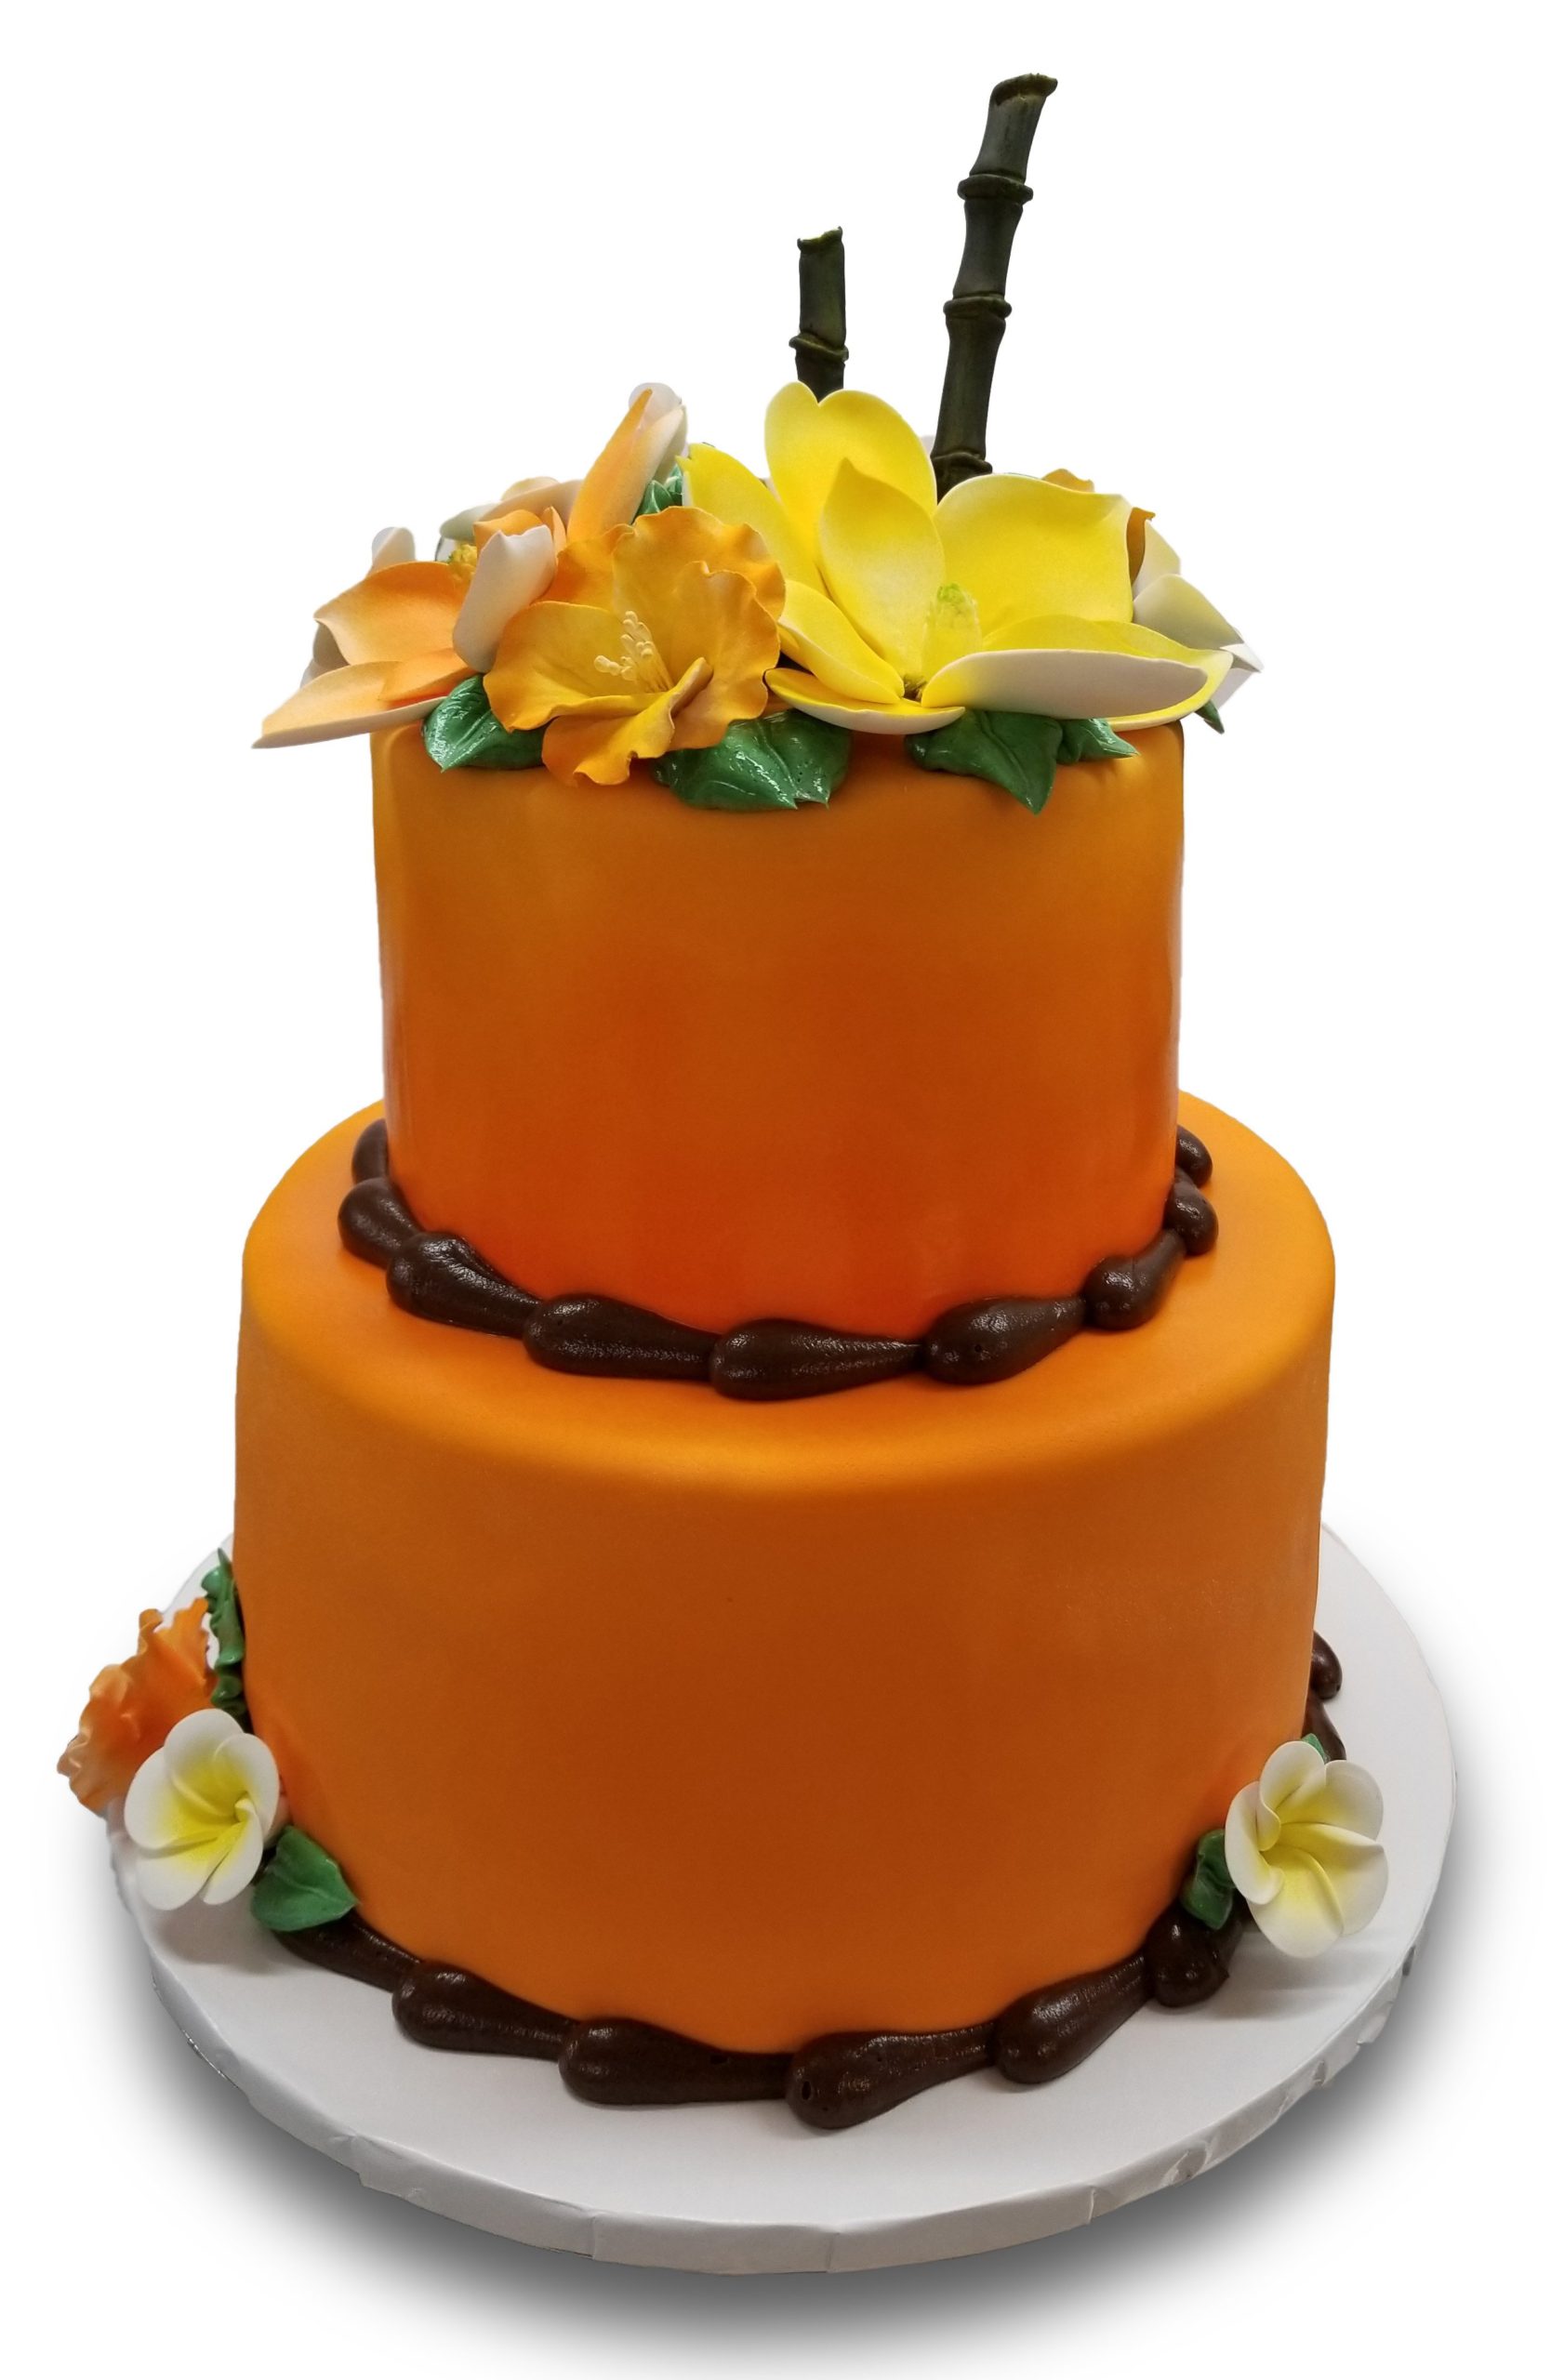 AB016. Orange tropical cake with gumpaste bamboo and flowers